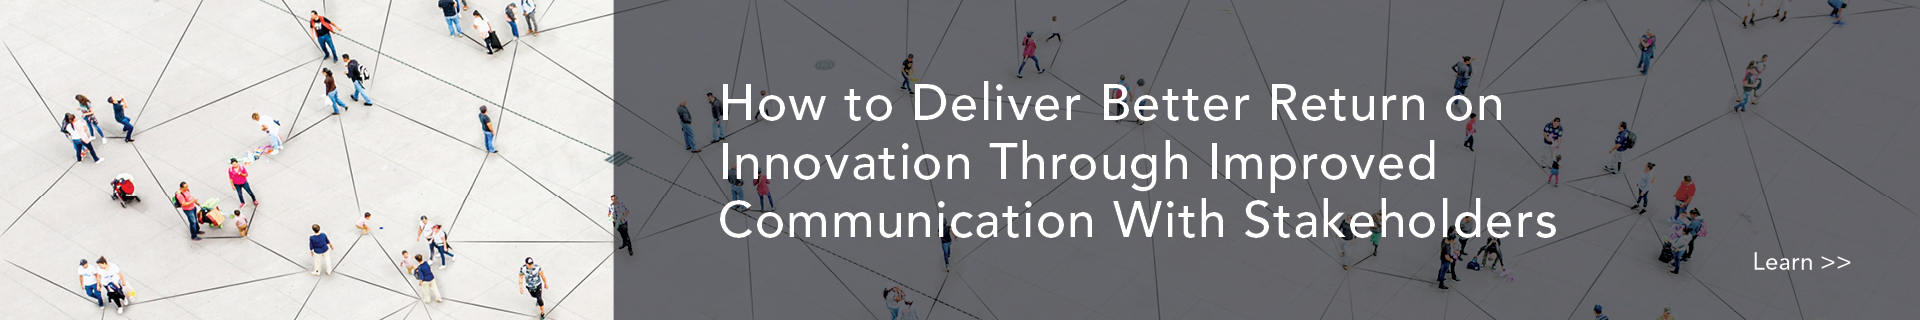 How to Deliver Better Return on Innovation Through Improved Communication With Stakeholders